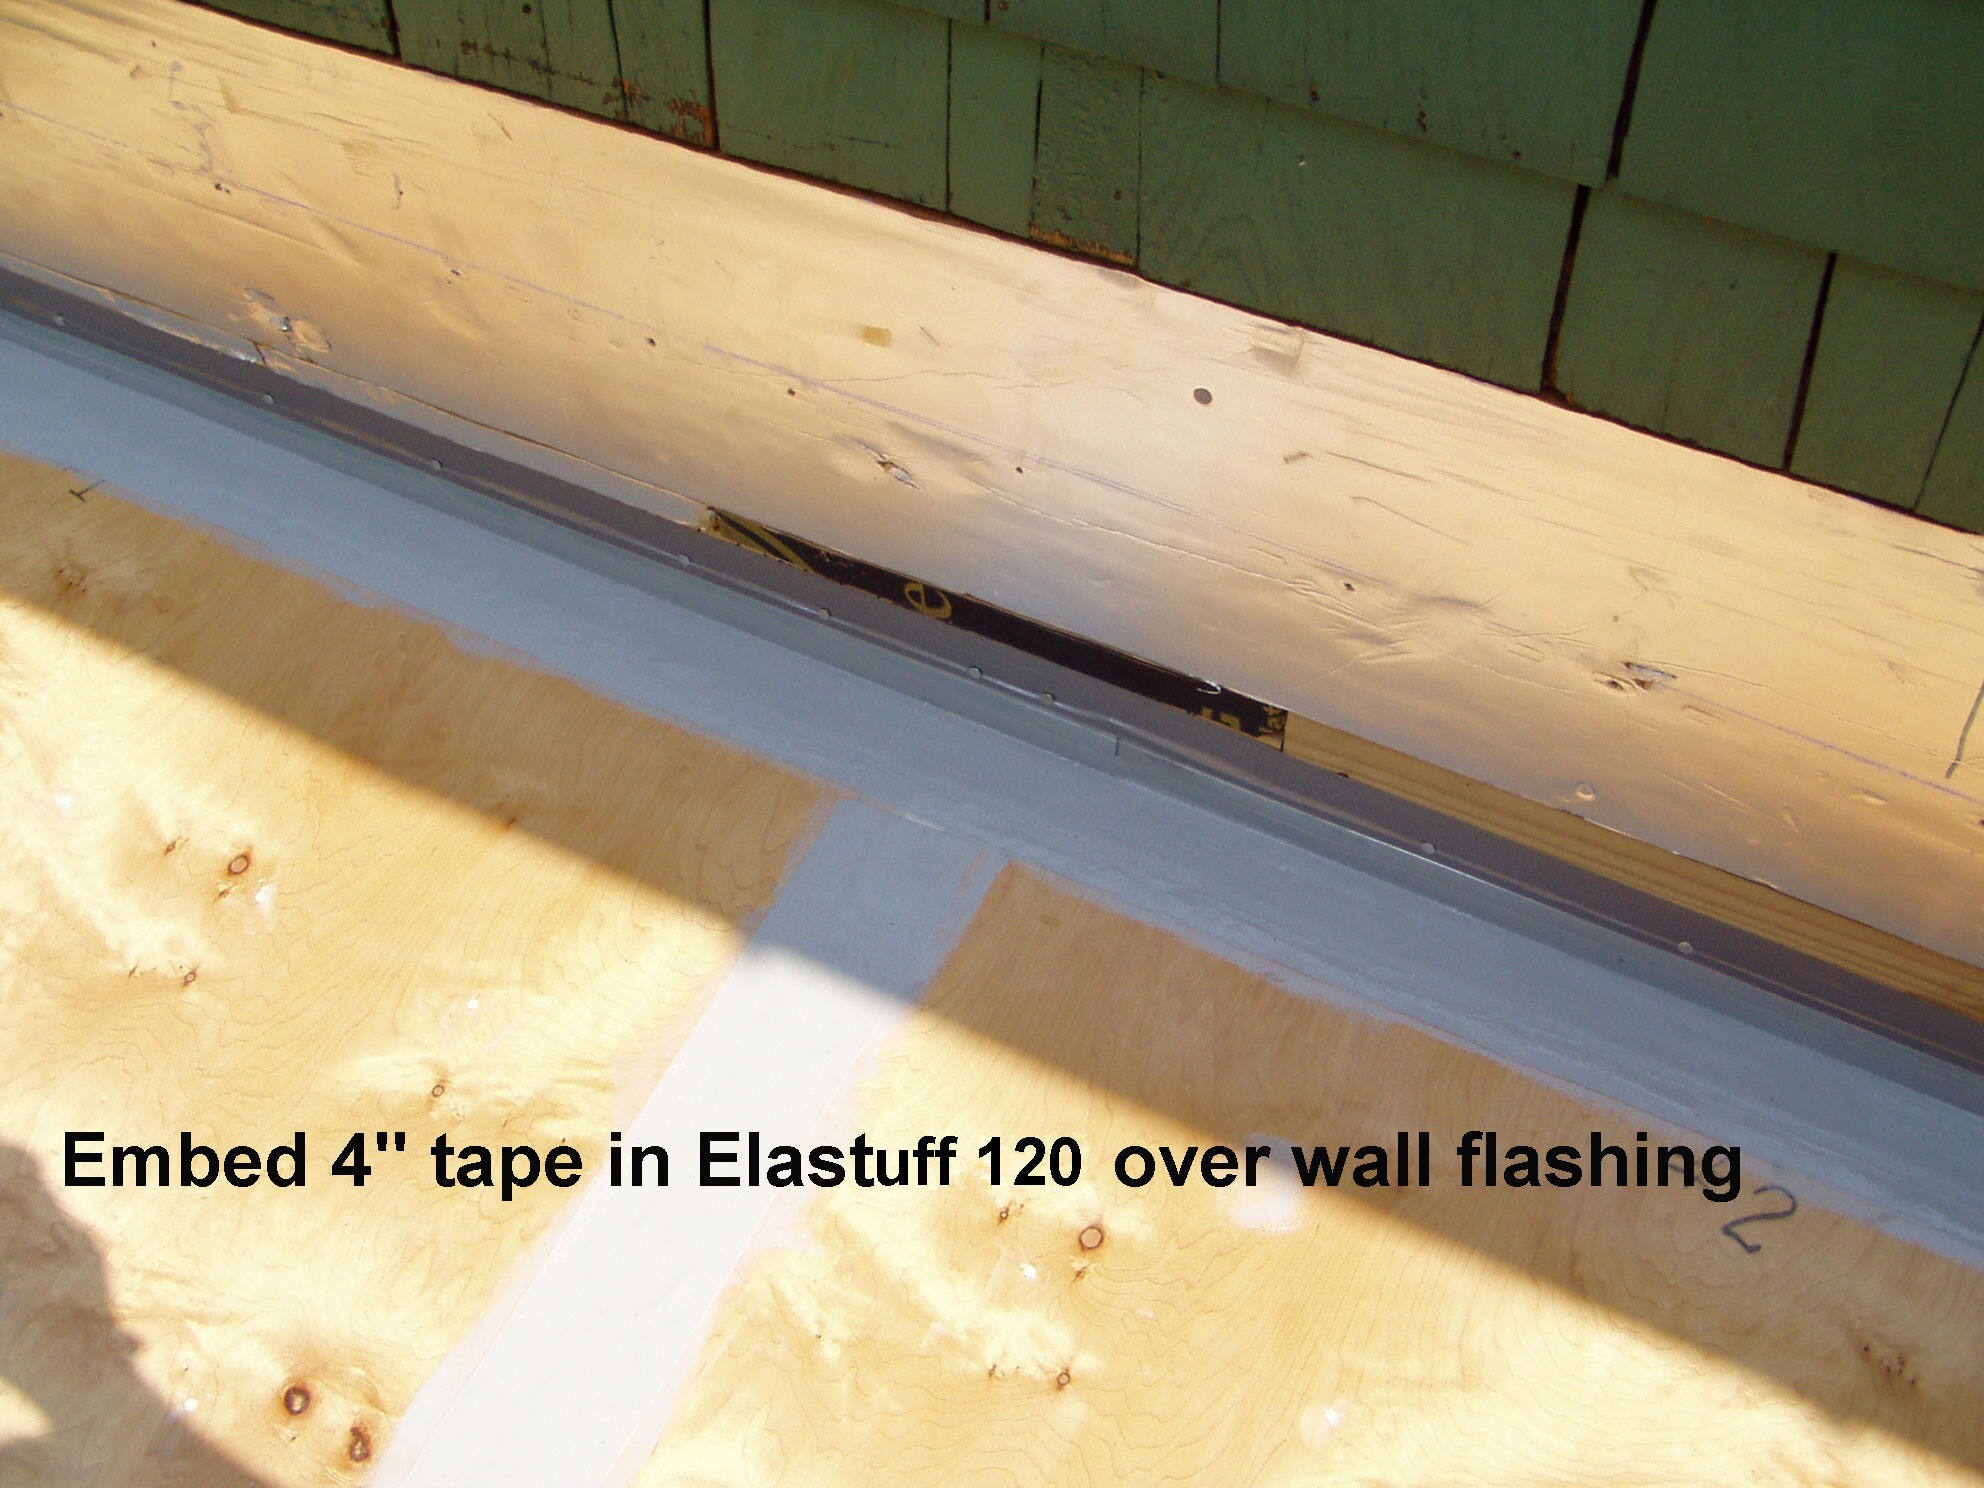 4 inch tape embeded in Elastuff 120 at flashing